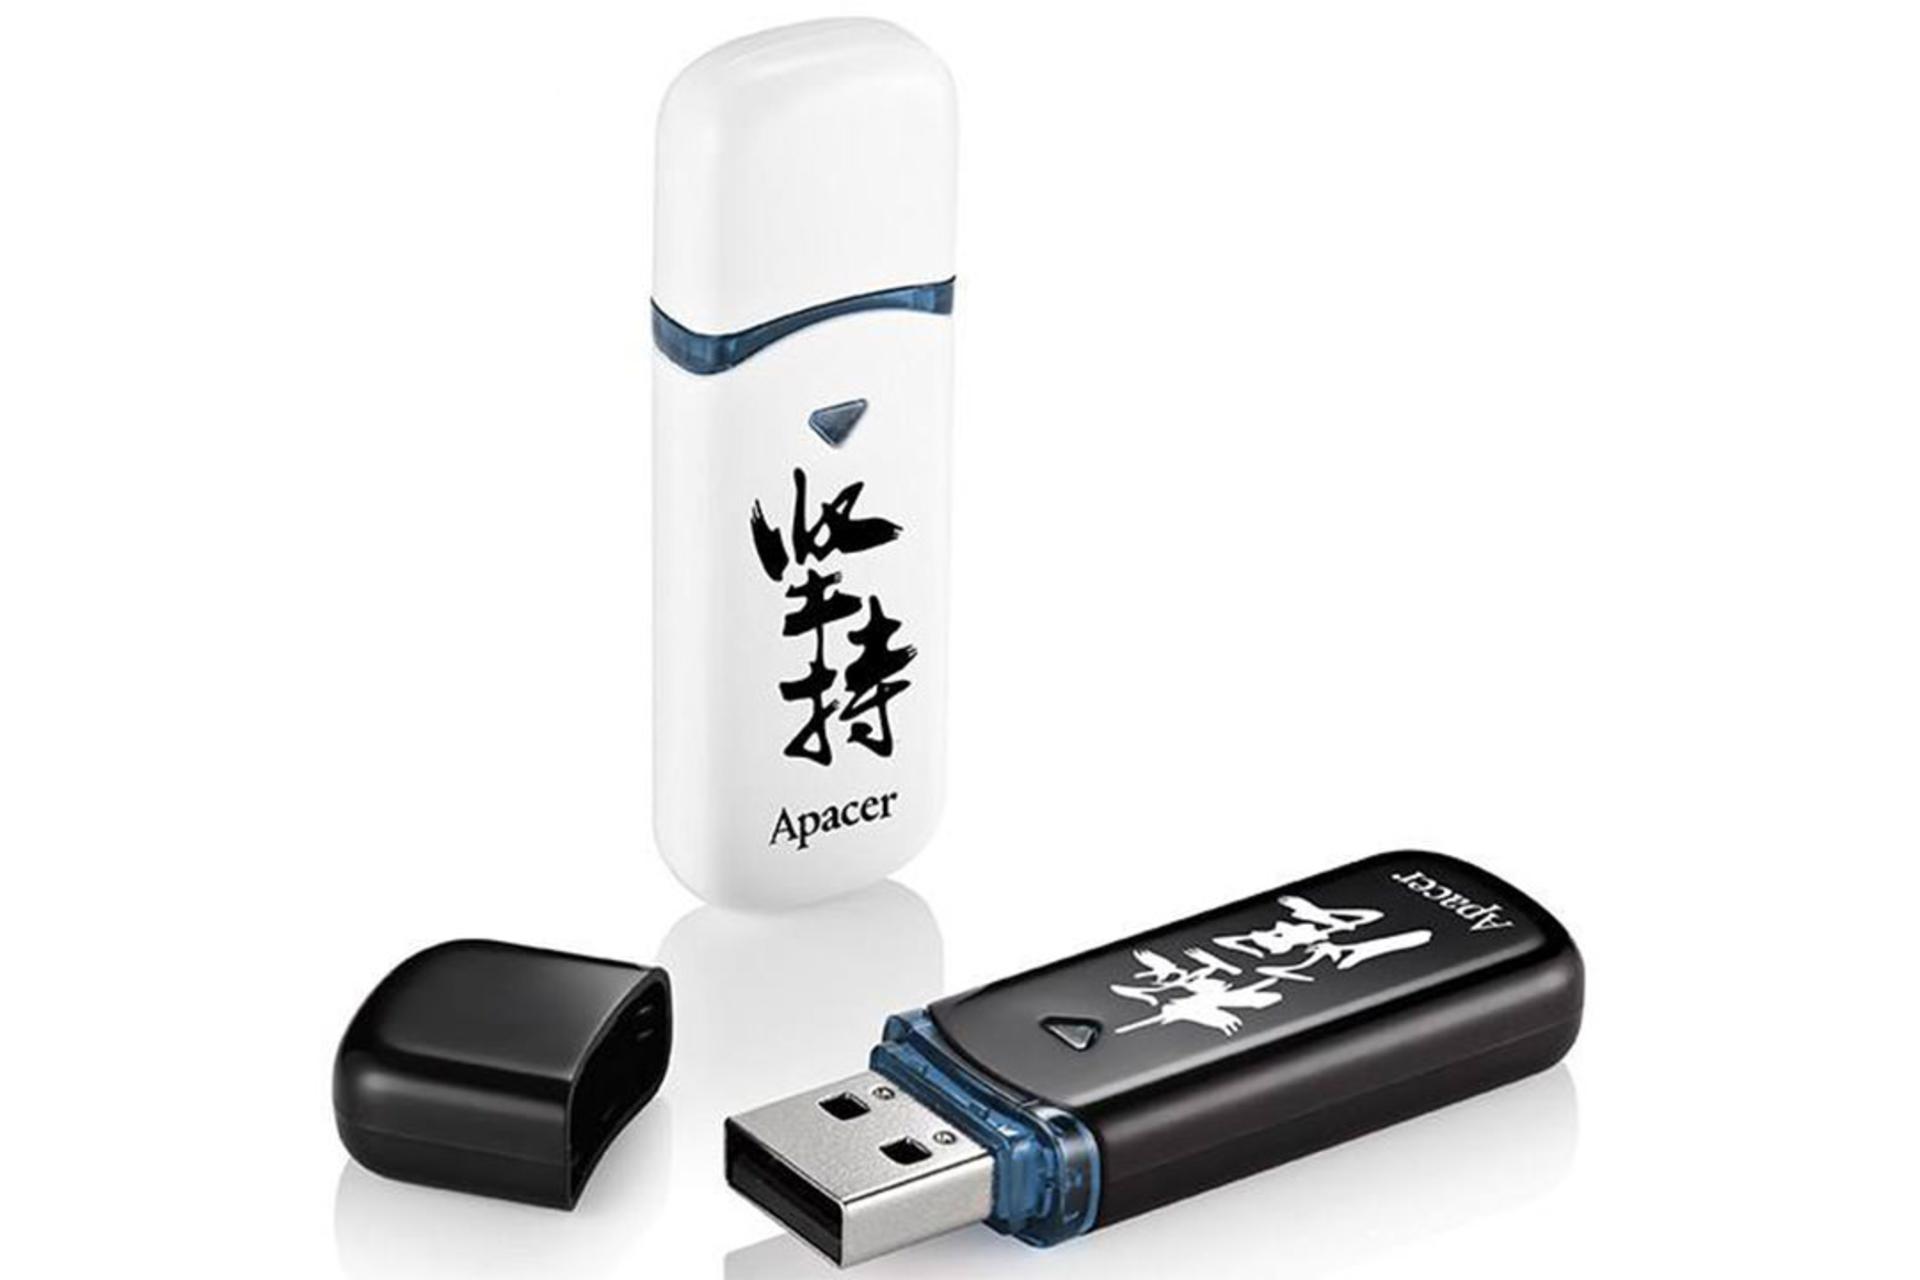 Apacer AH333 Chinese Character Edition